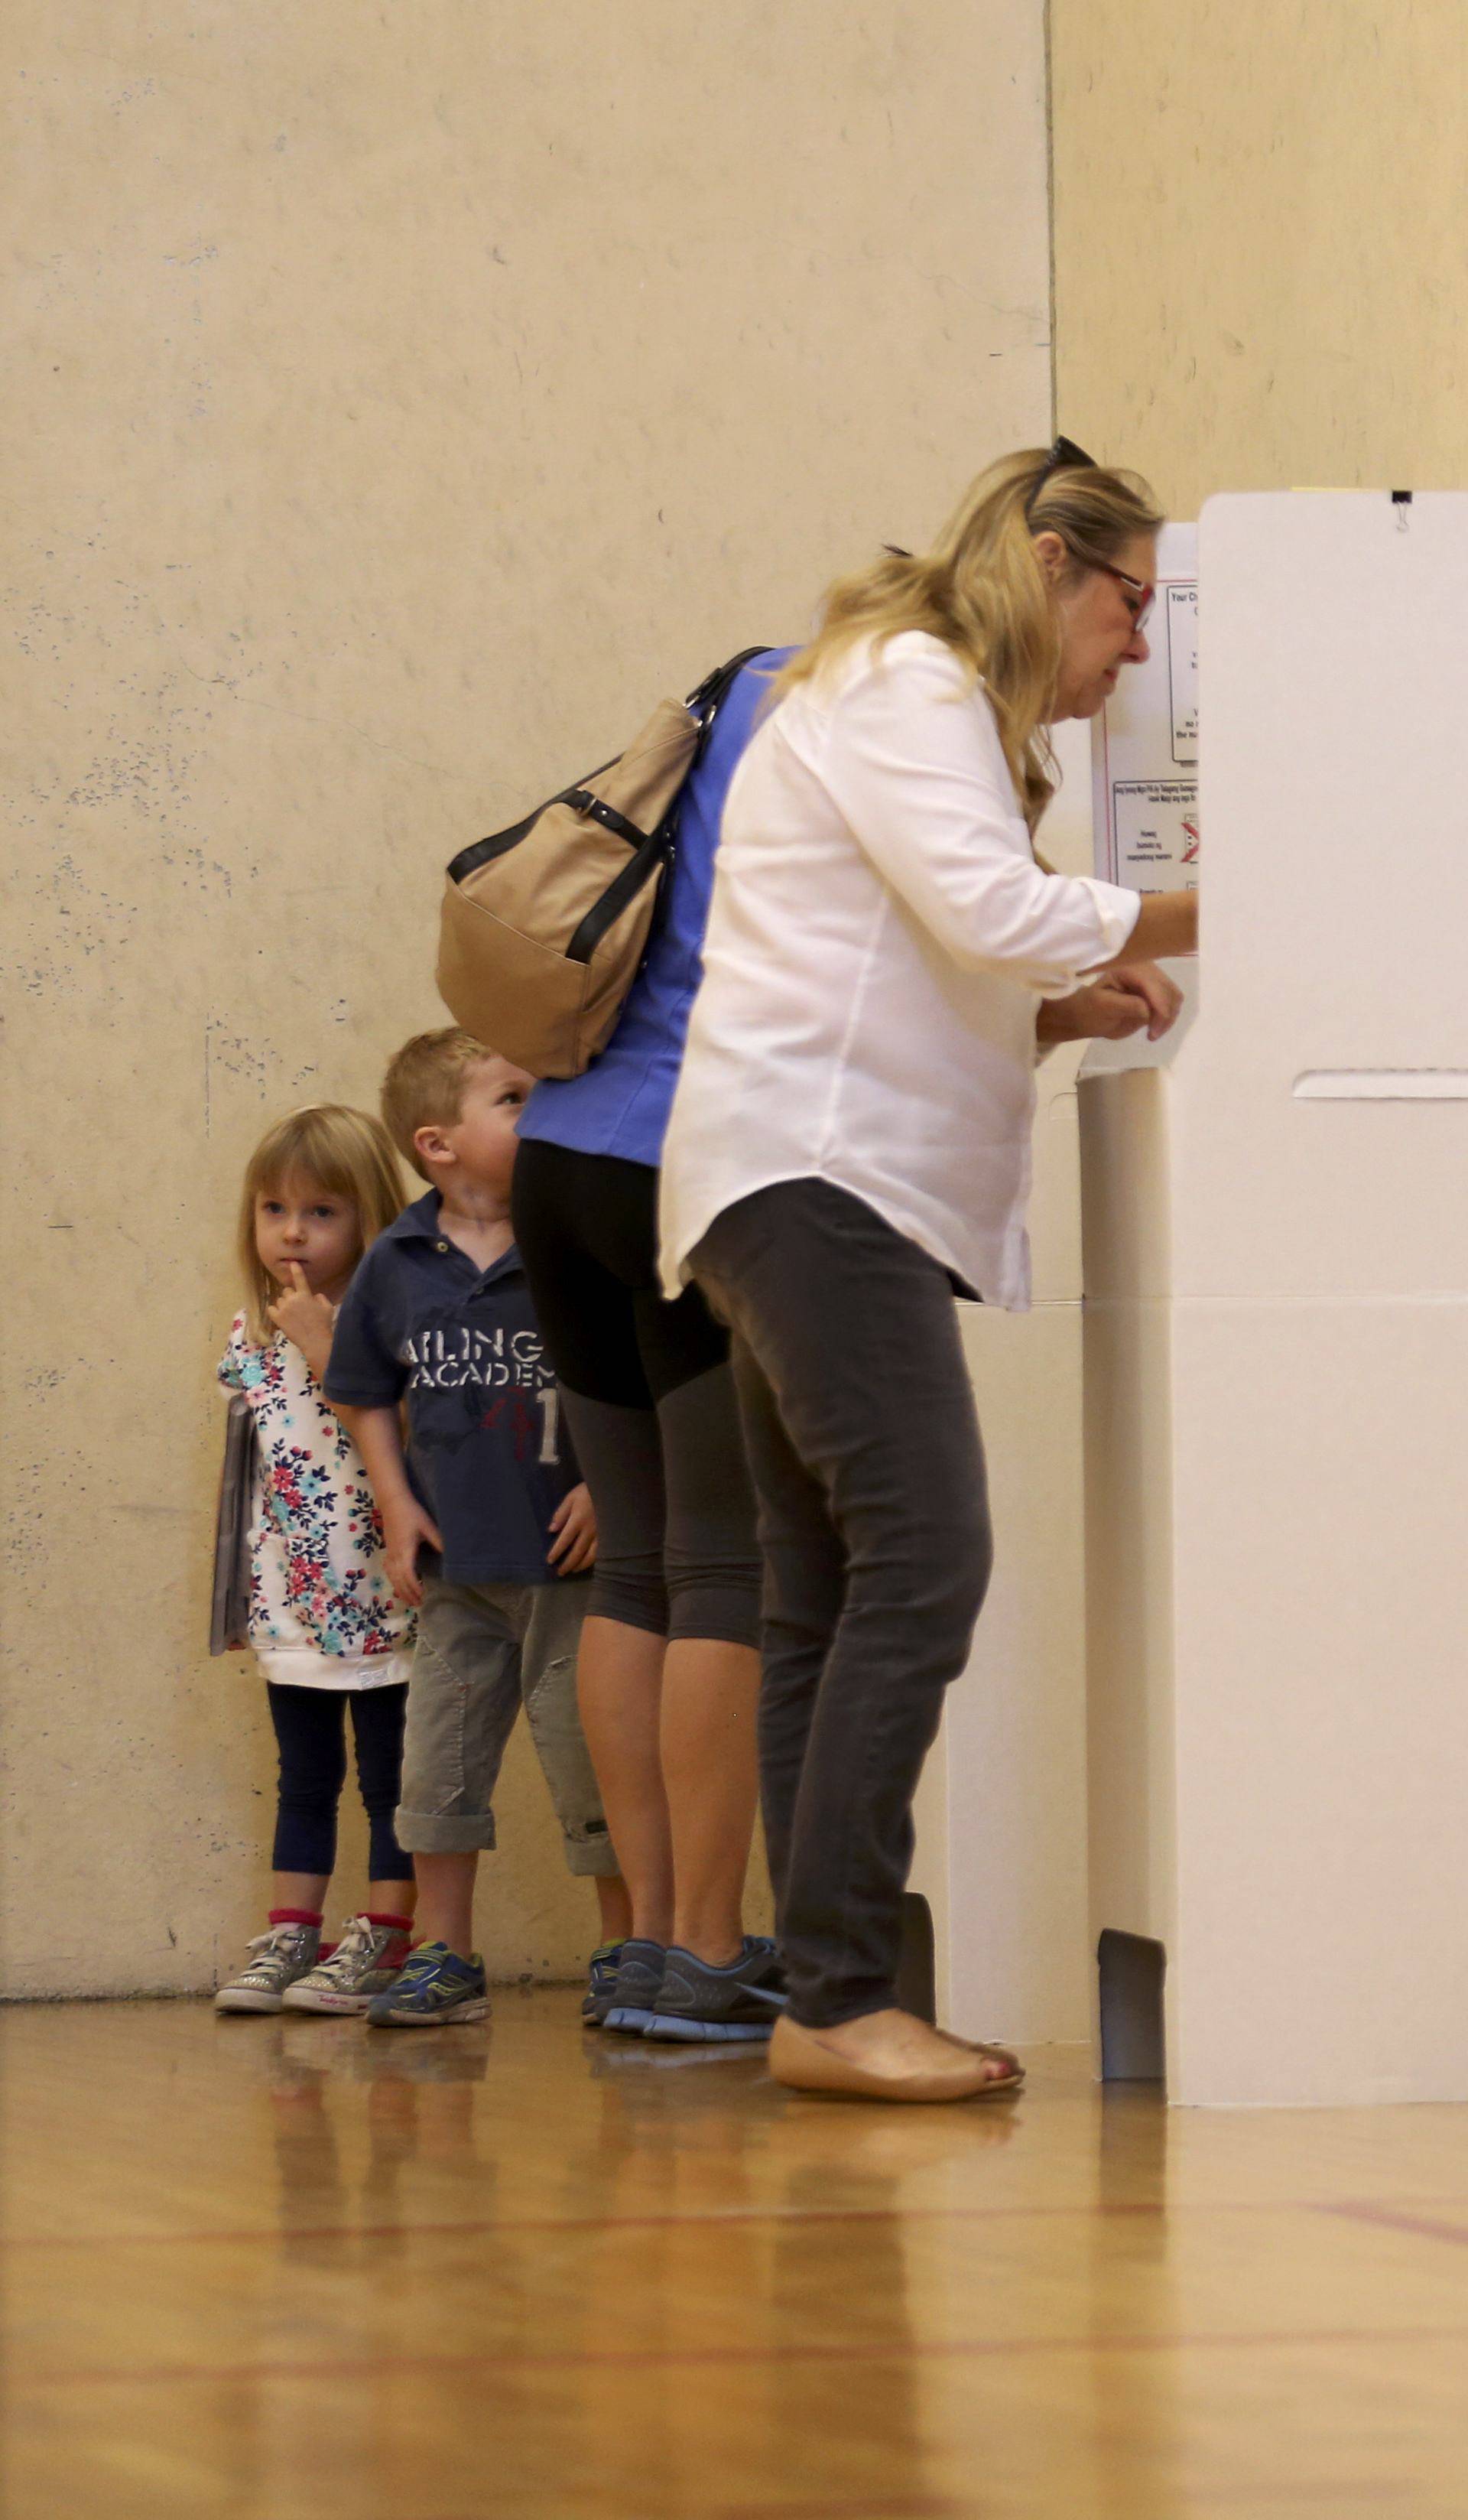 A mother casts her ballot with her two kids during voting in the 2016 presidential election in San Diego, California